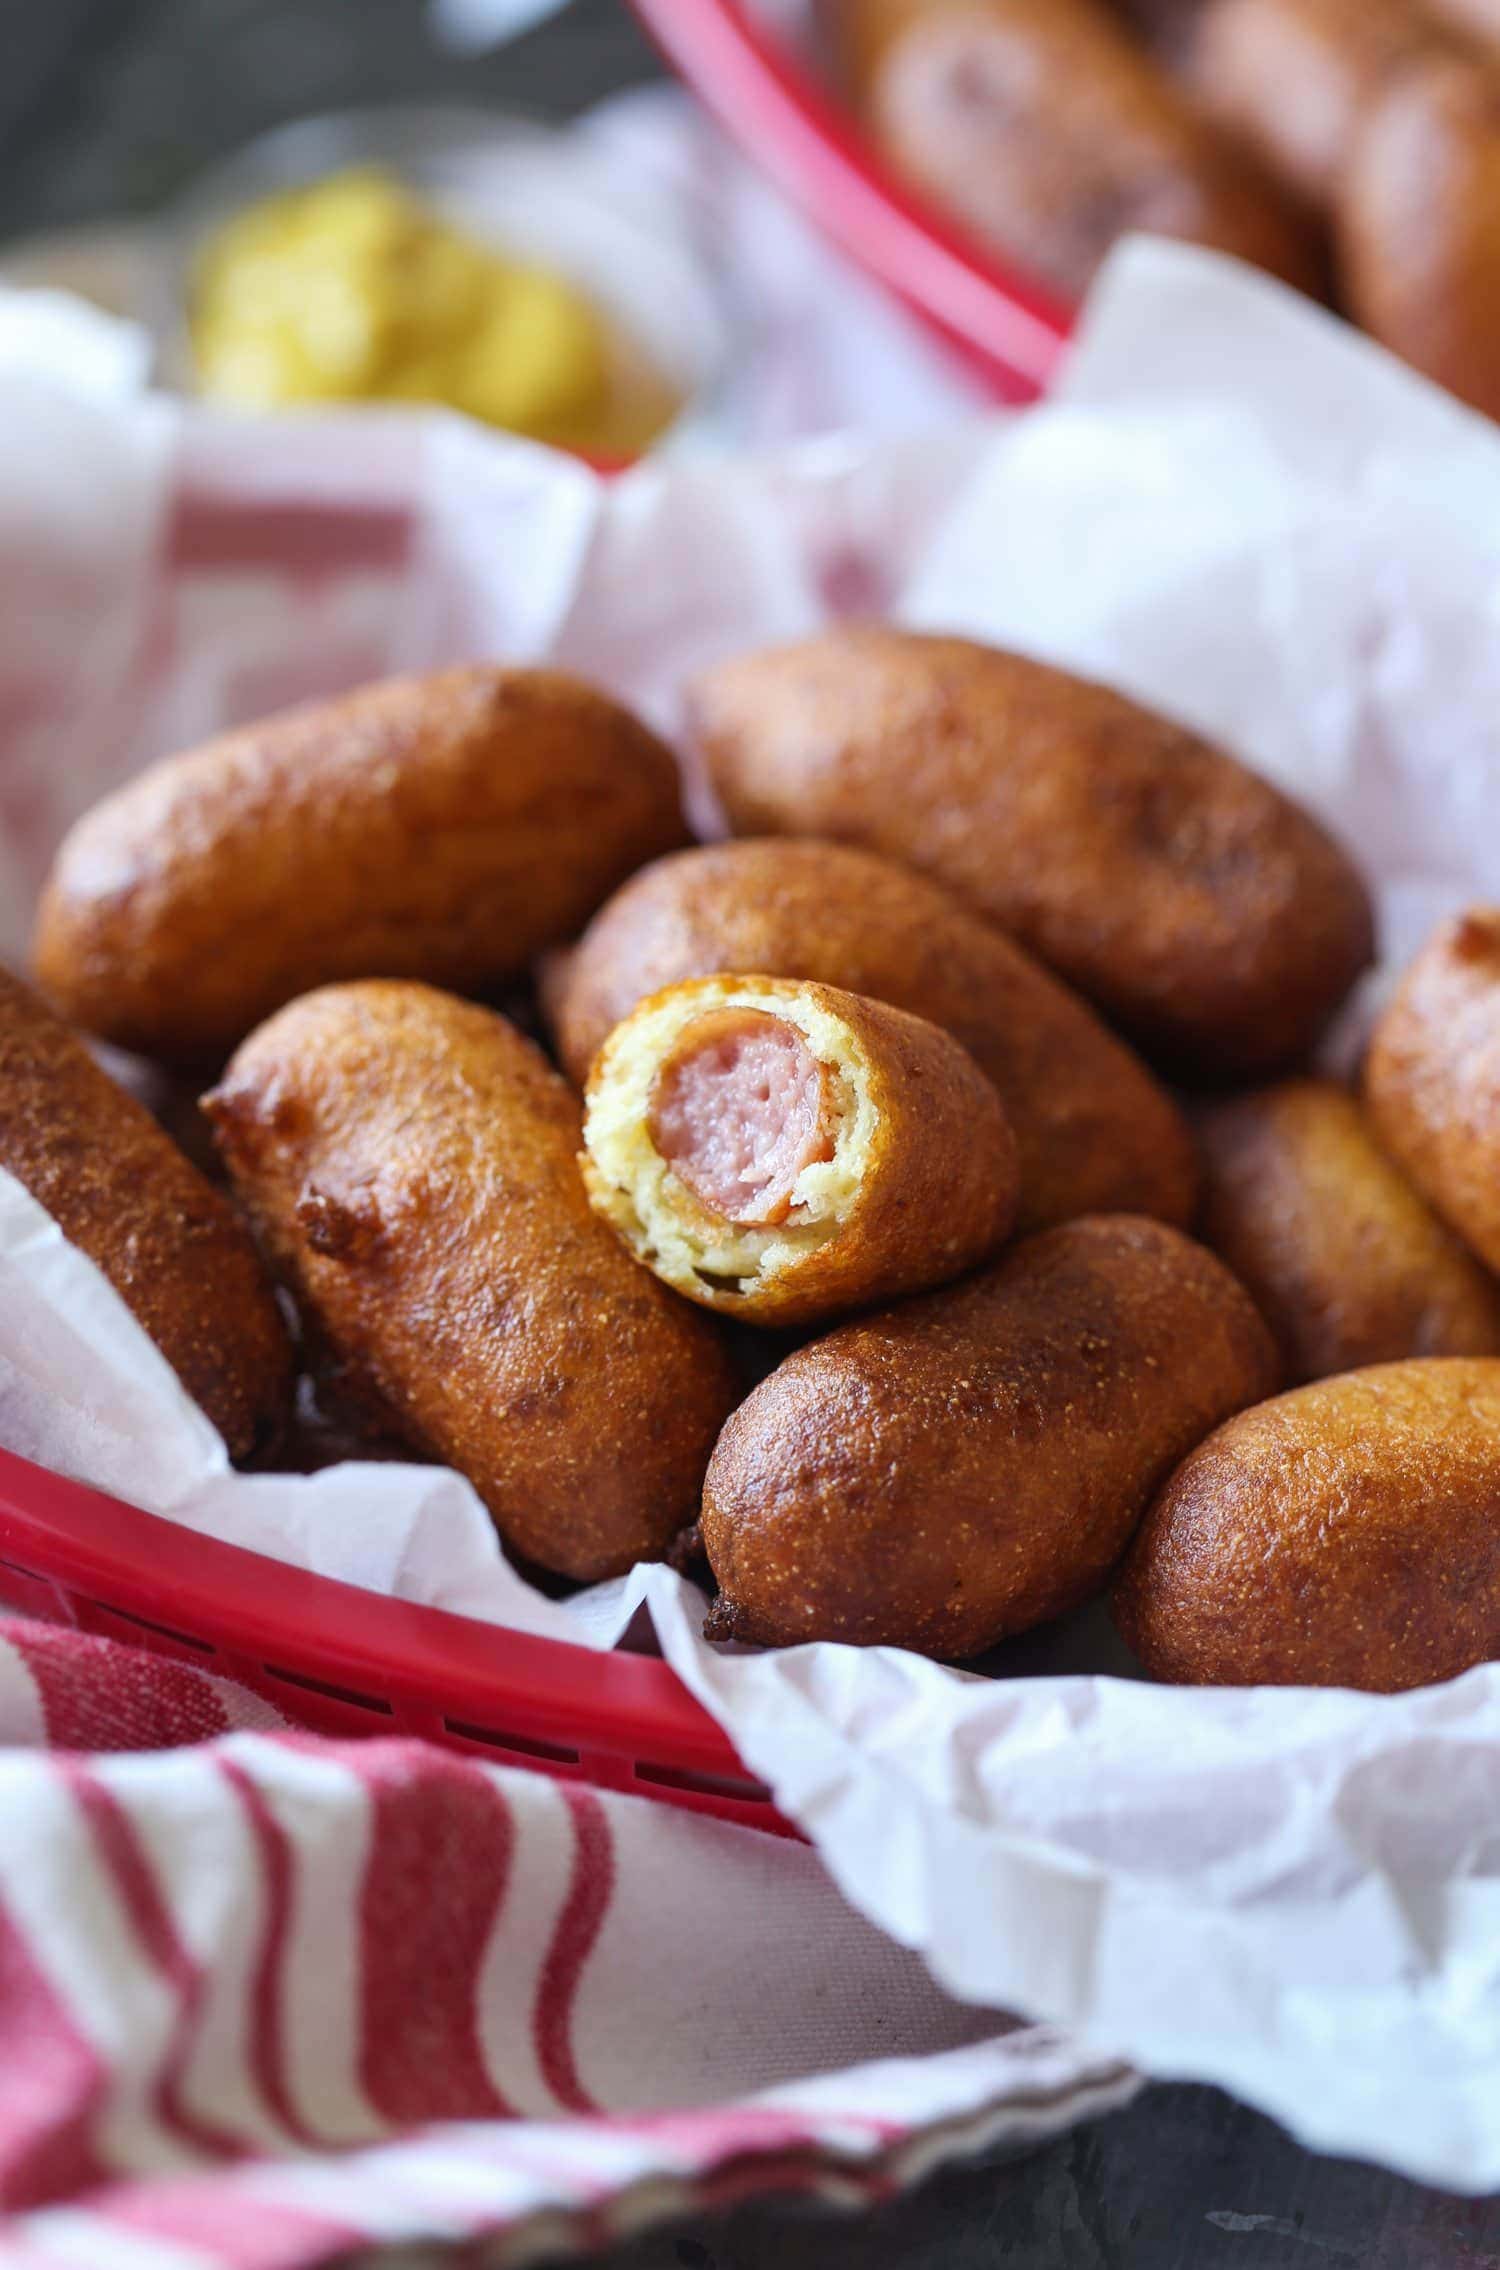 A mini corn dog with a bite taken out of it, in a basket of more corn dogs.